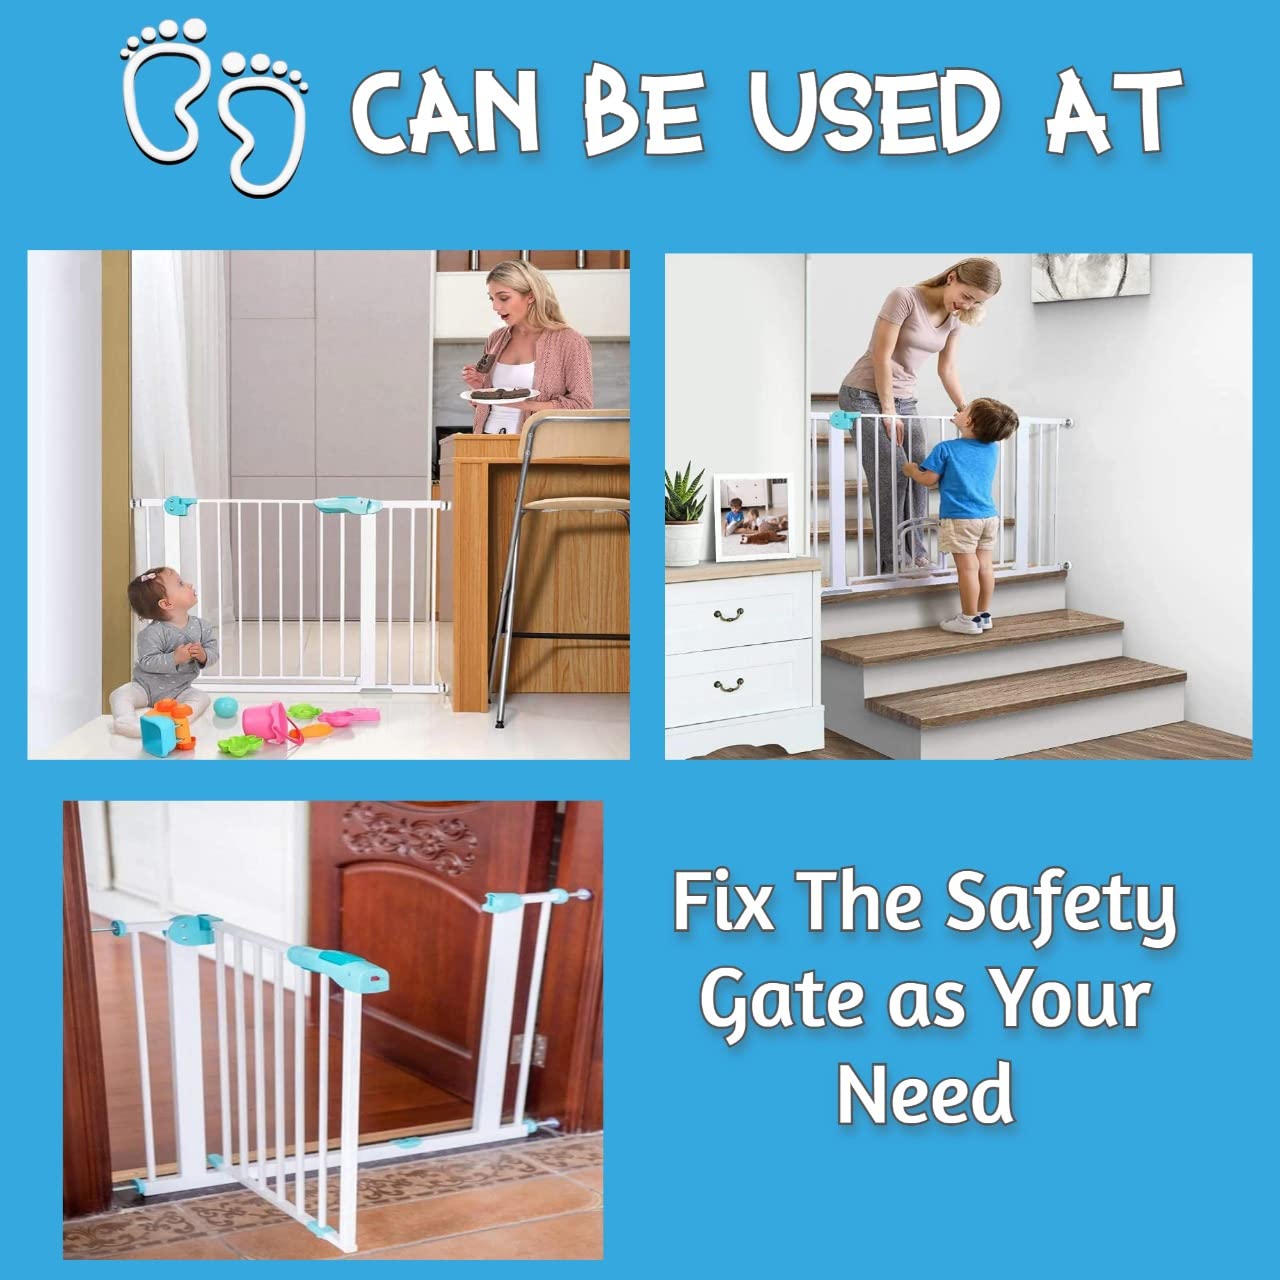 Metreno 75-82cm Adjustable Baby Safety Gate Metal Child Railing Two Way Auto Close Barrier for Stairs,Door,Hallways & Kitchen Dog/Pet Drill Free